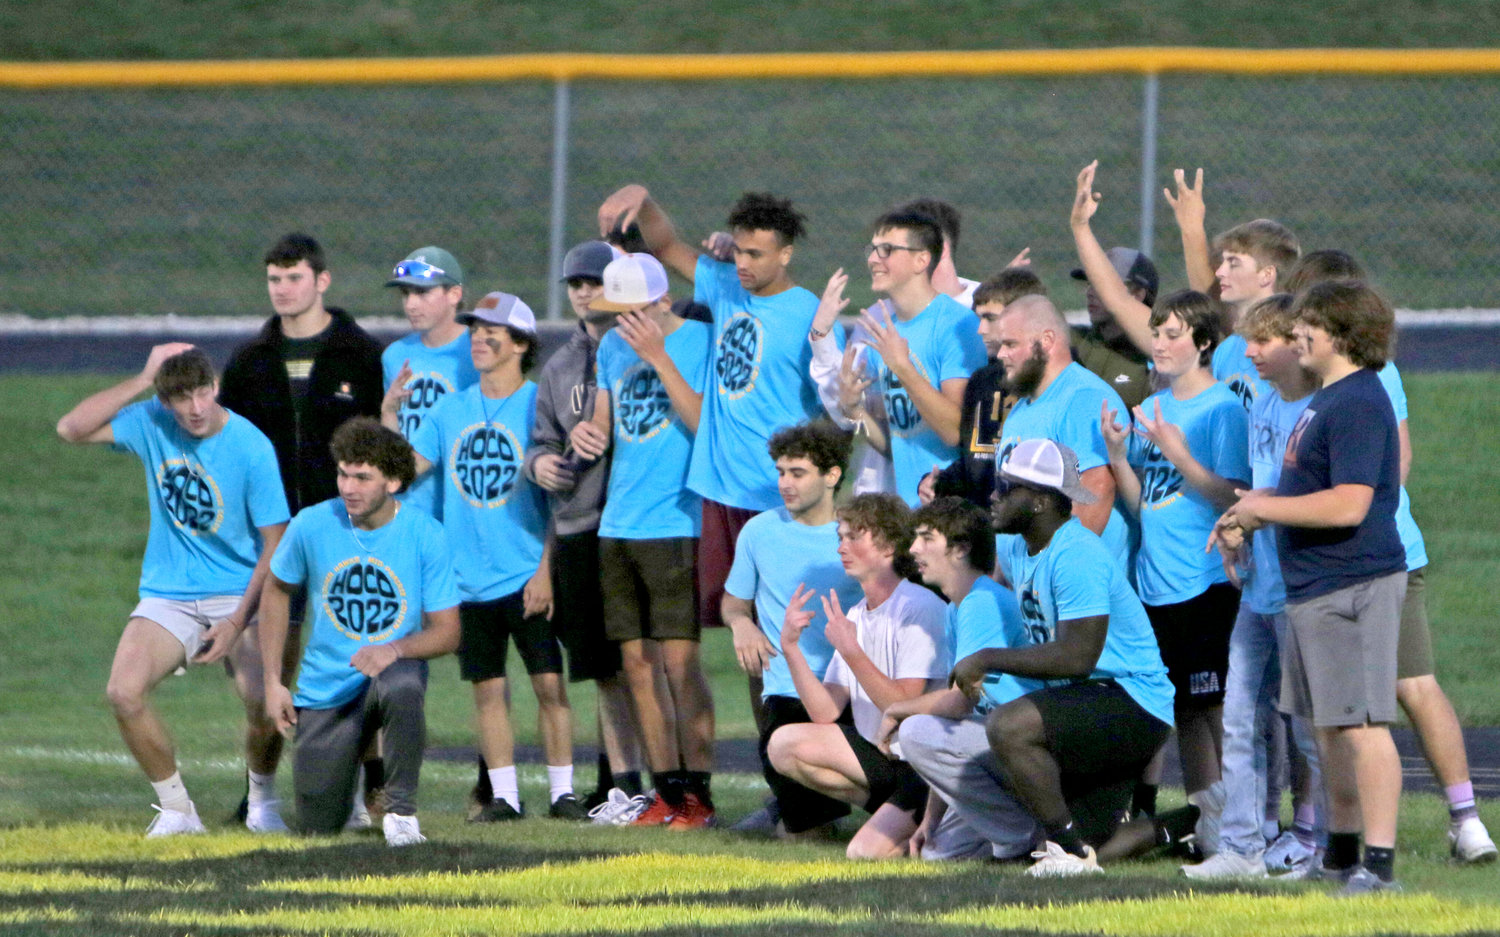 Celebrations are in order after a winning effort in Kickball.